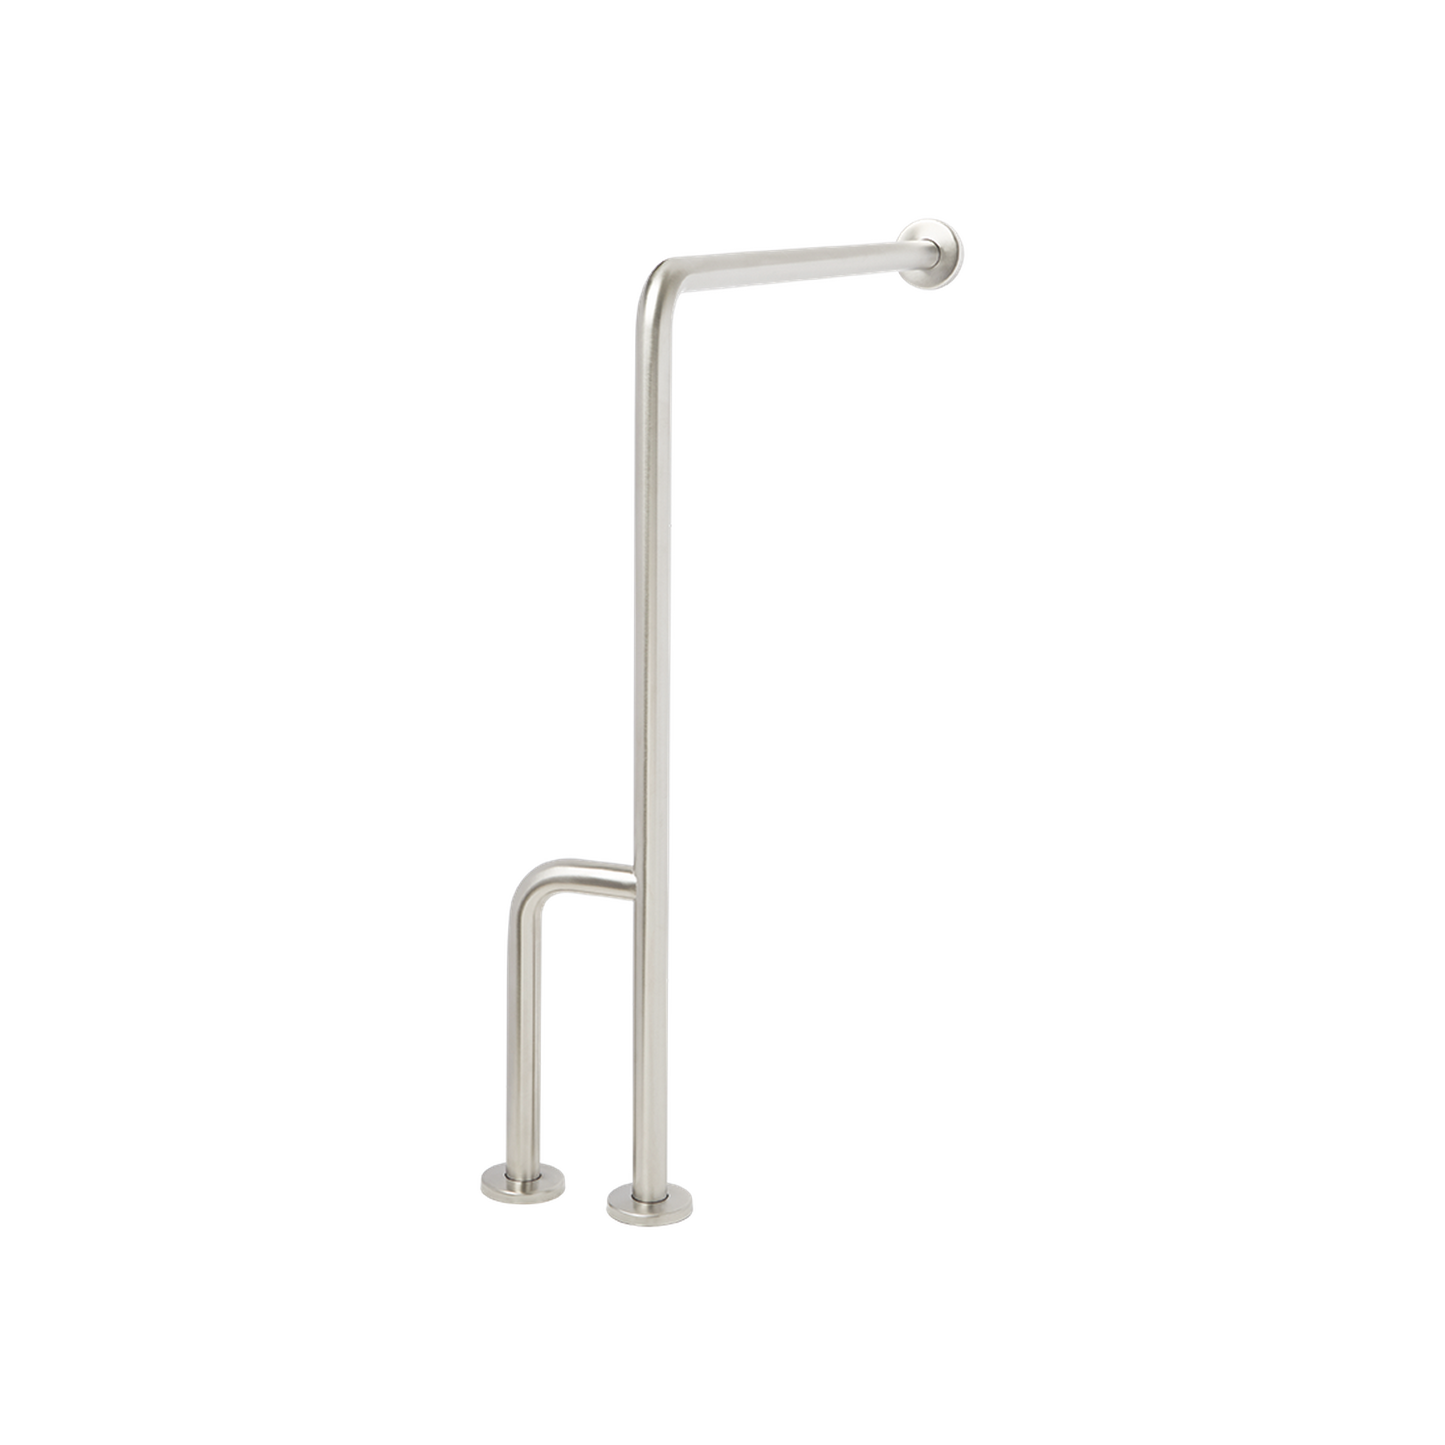 Seachrome Signature Series 33" H x 30" D Satin Stainless Steel 1.5" Bar Diameter Exposed Flange Left-Handed Configuration Wall-To-Floor Grab Bar With Side Leg